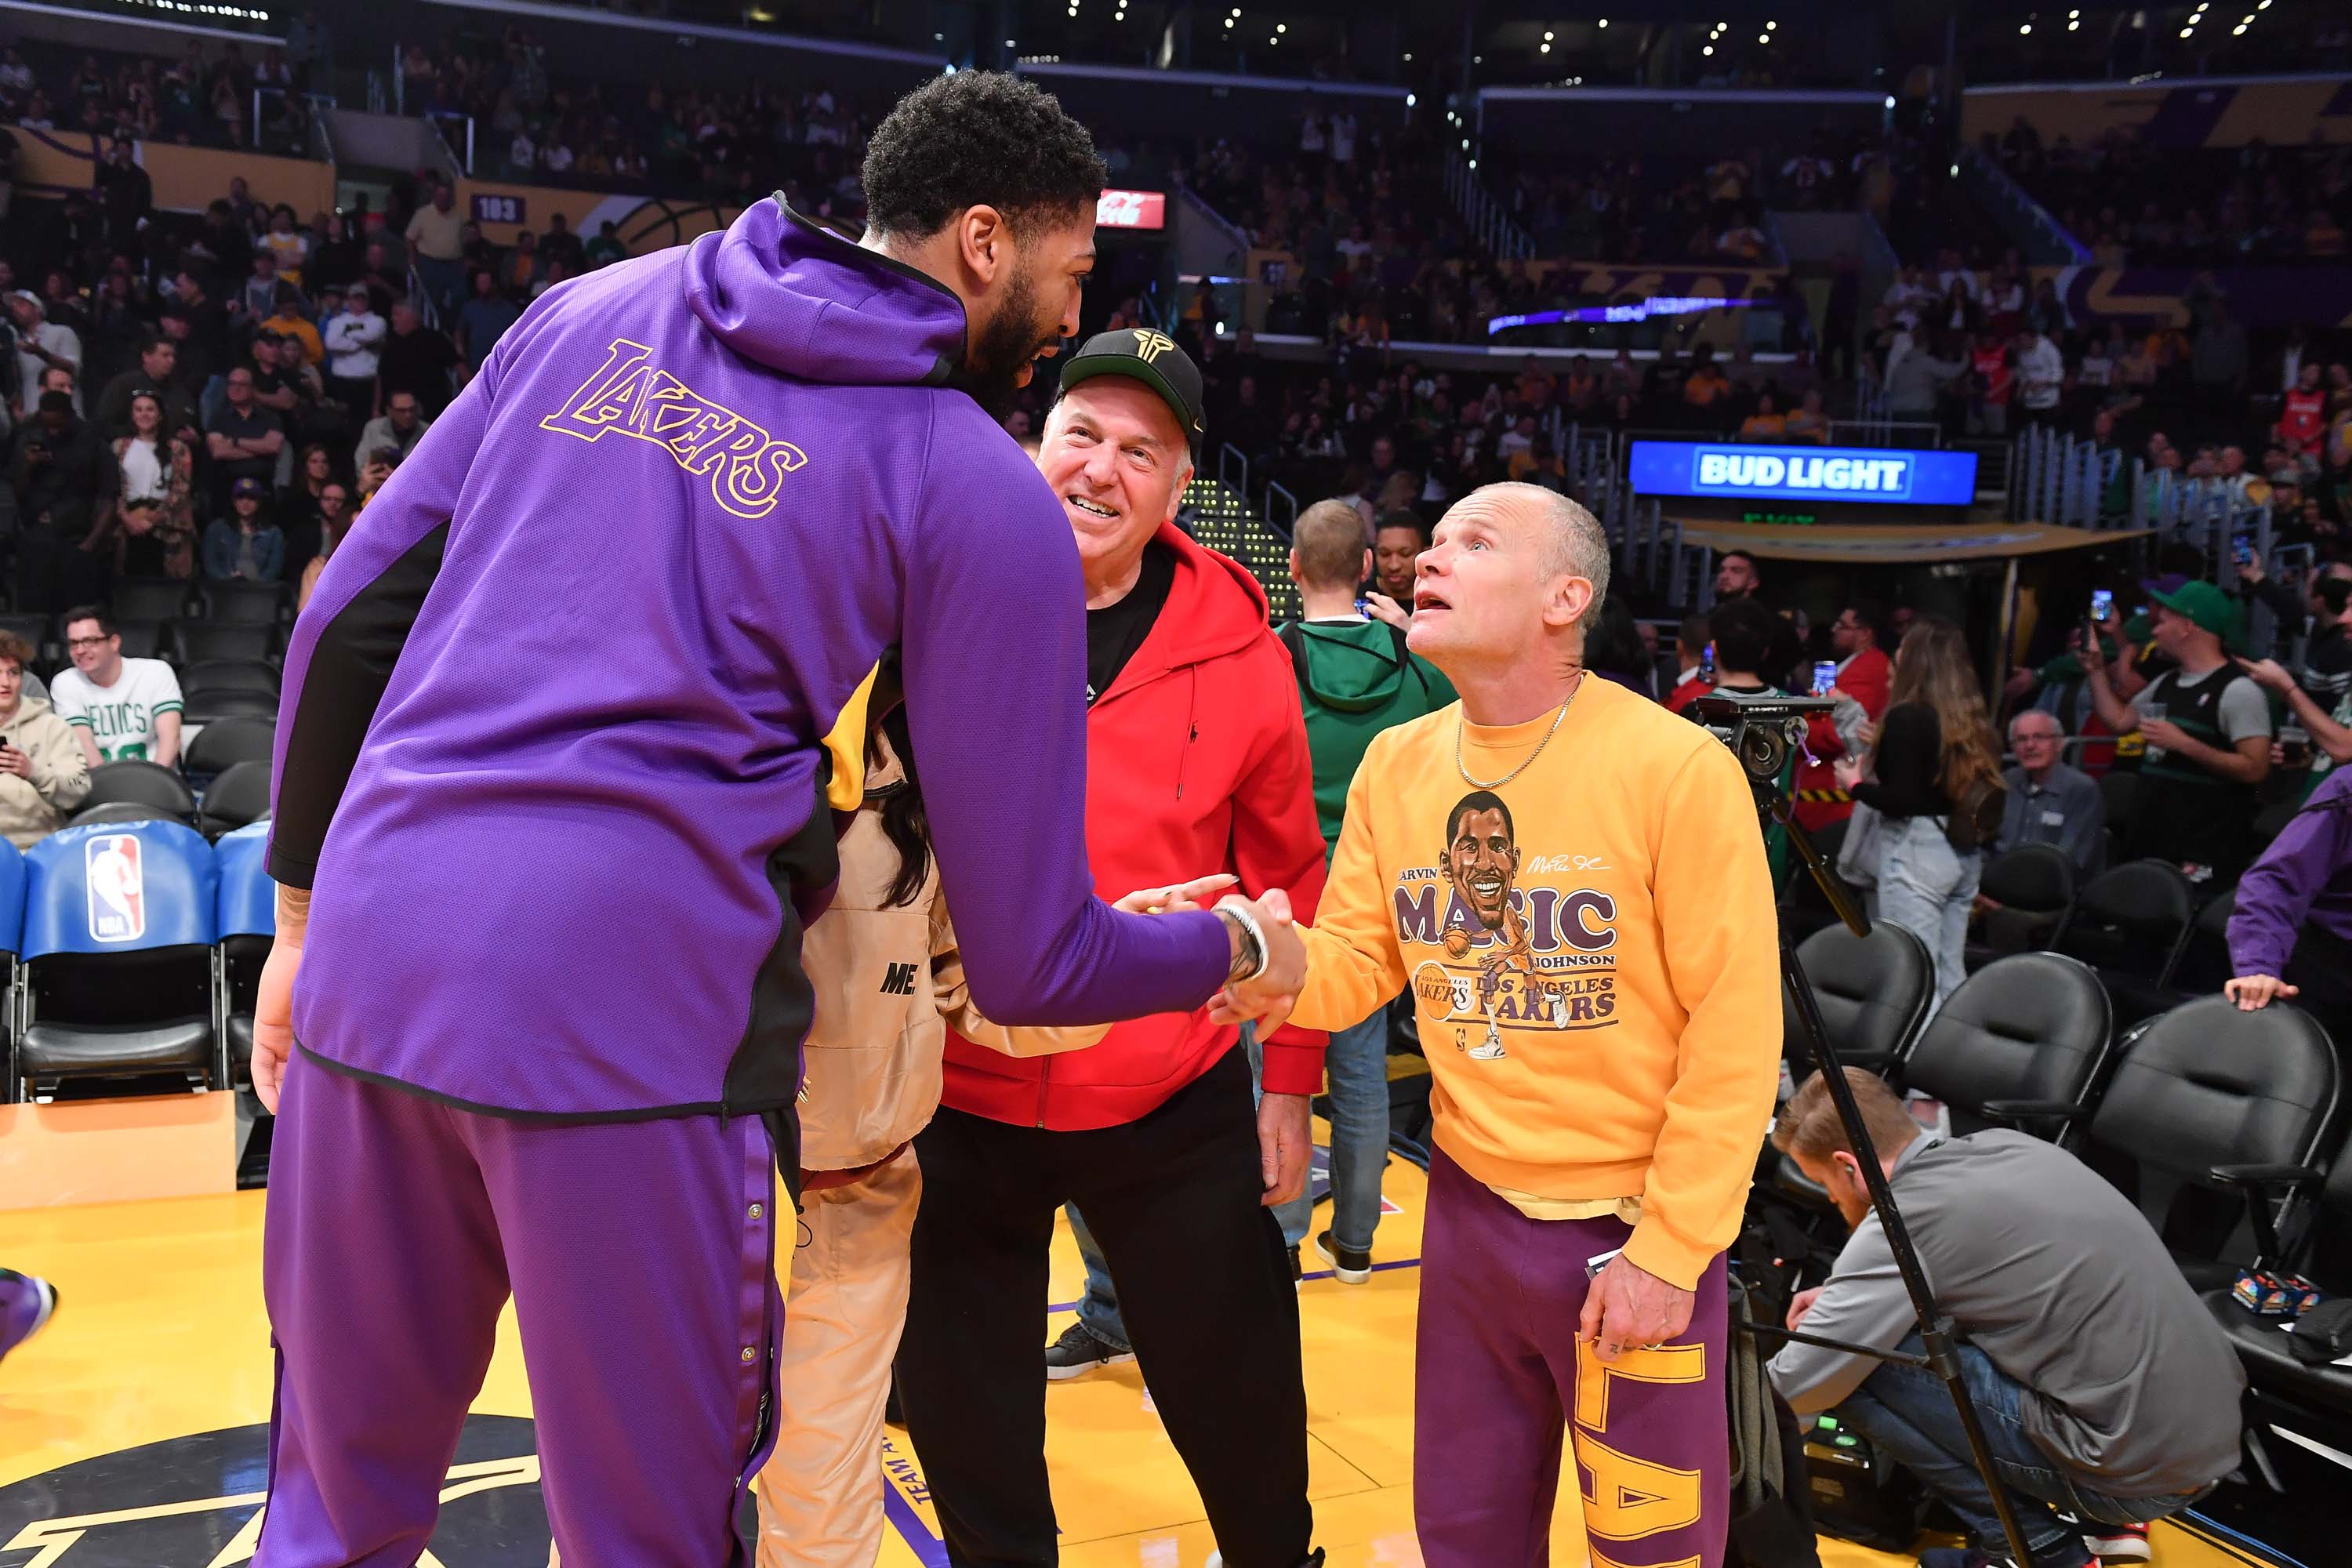 Photos: Lakers vs Spurs (12/23/21) Photo Gallery